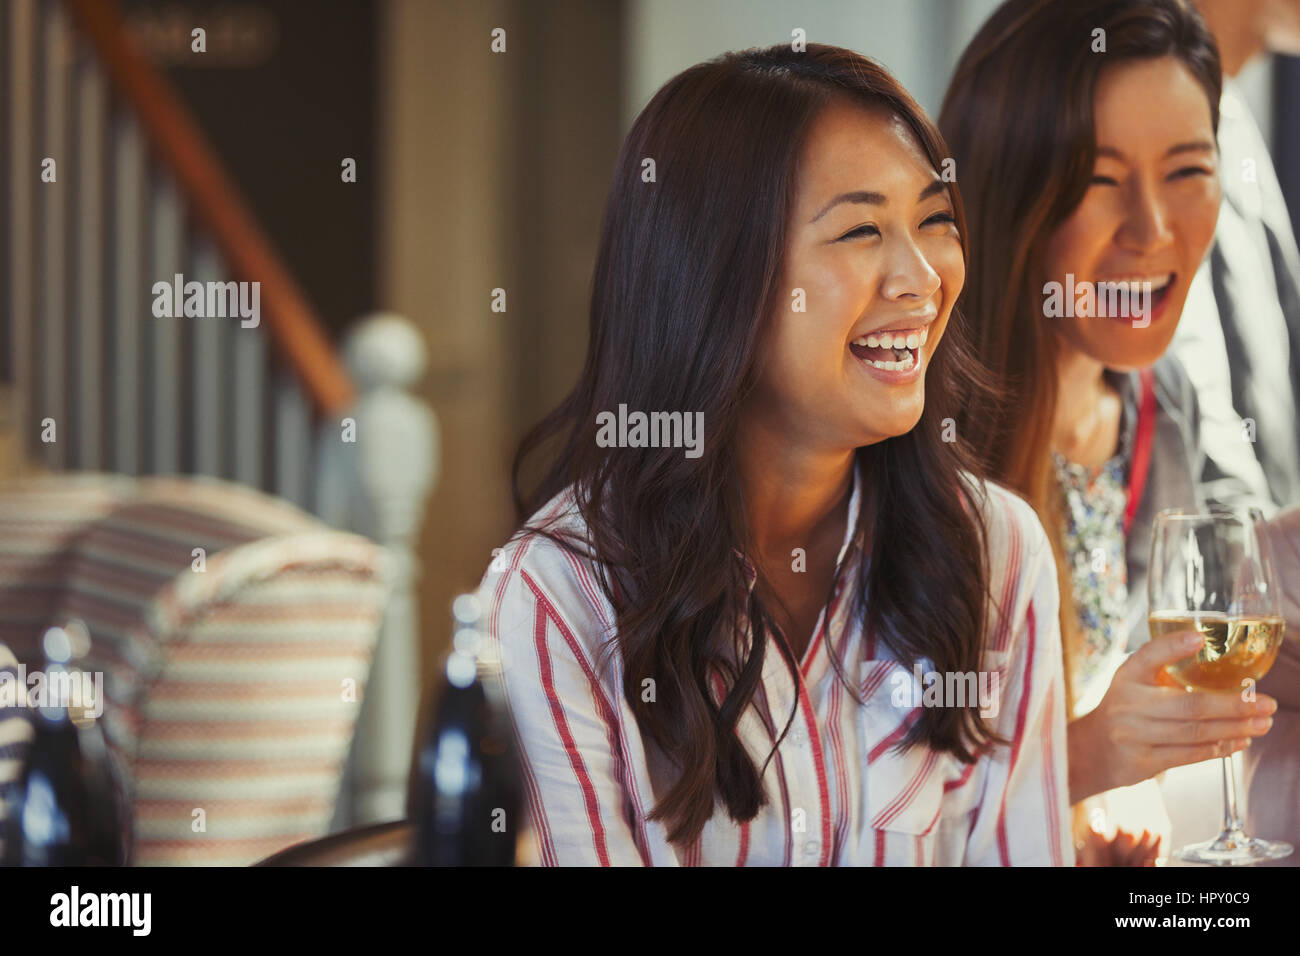 Laughing women friends drinking wine at bar Stock Photo